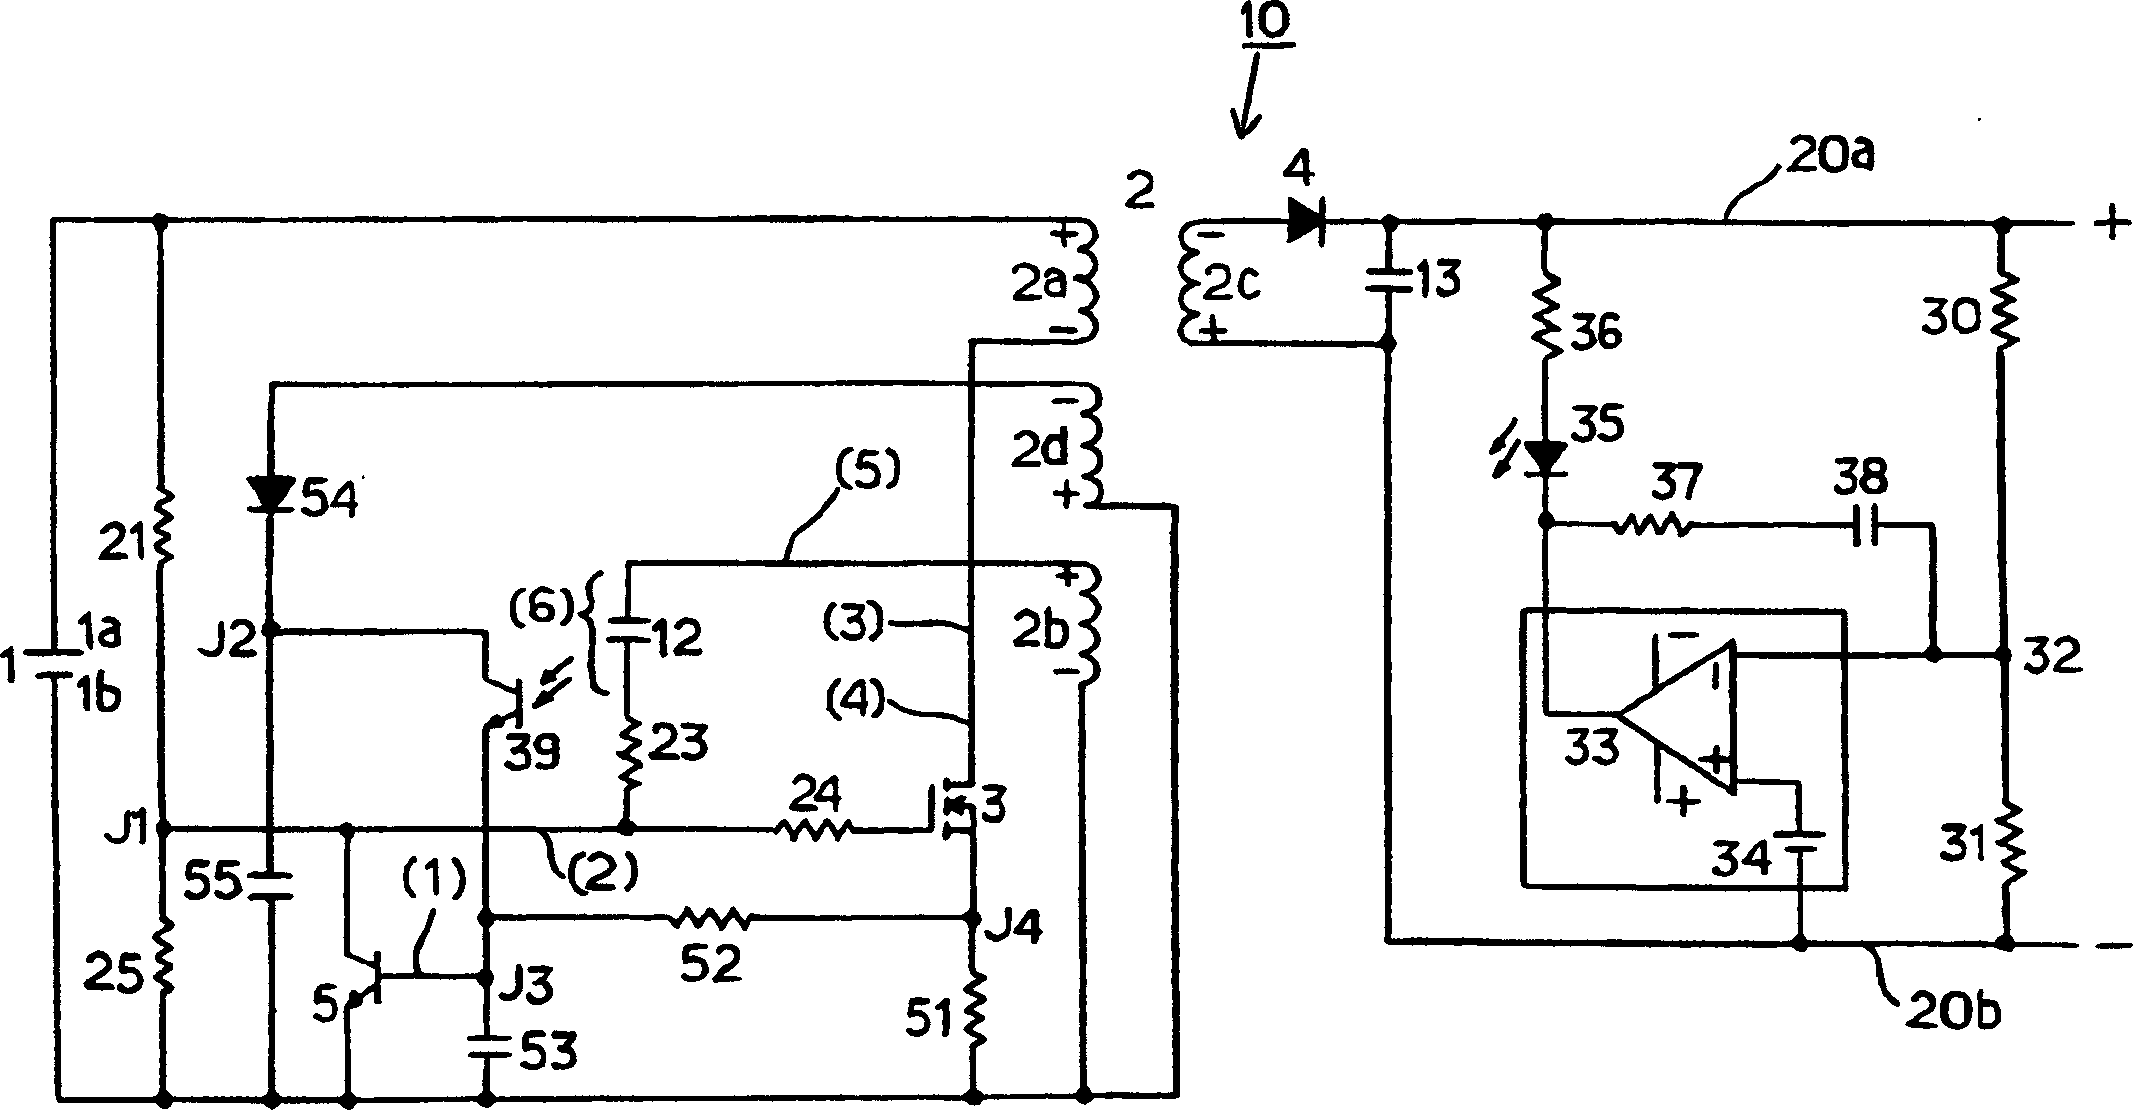 Self-excited switching power supply circuit